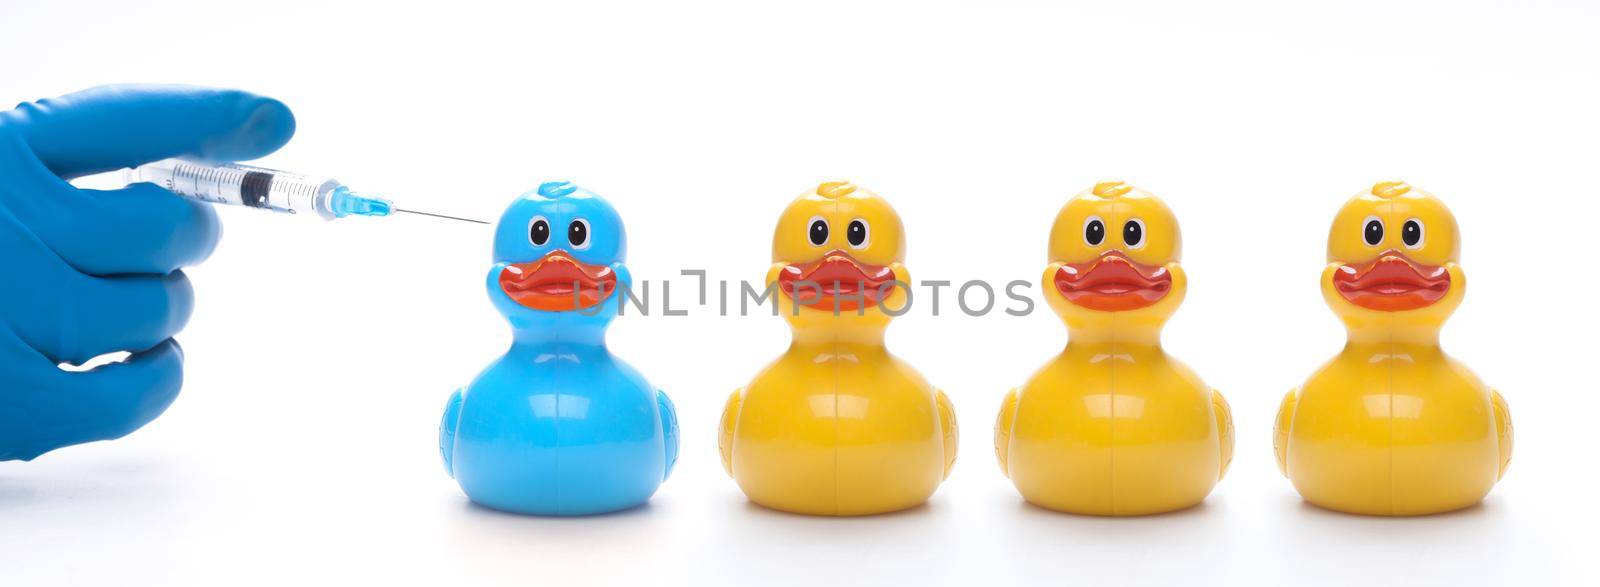 Medical syringe with a needle for vaccination on a duck toy. by Taut